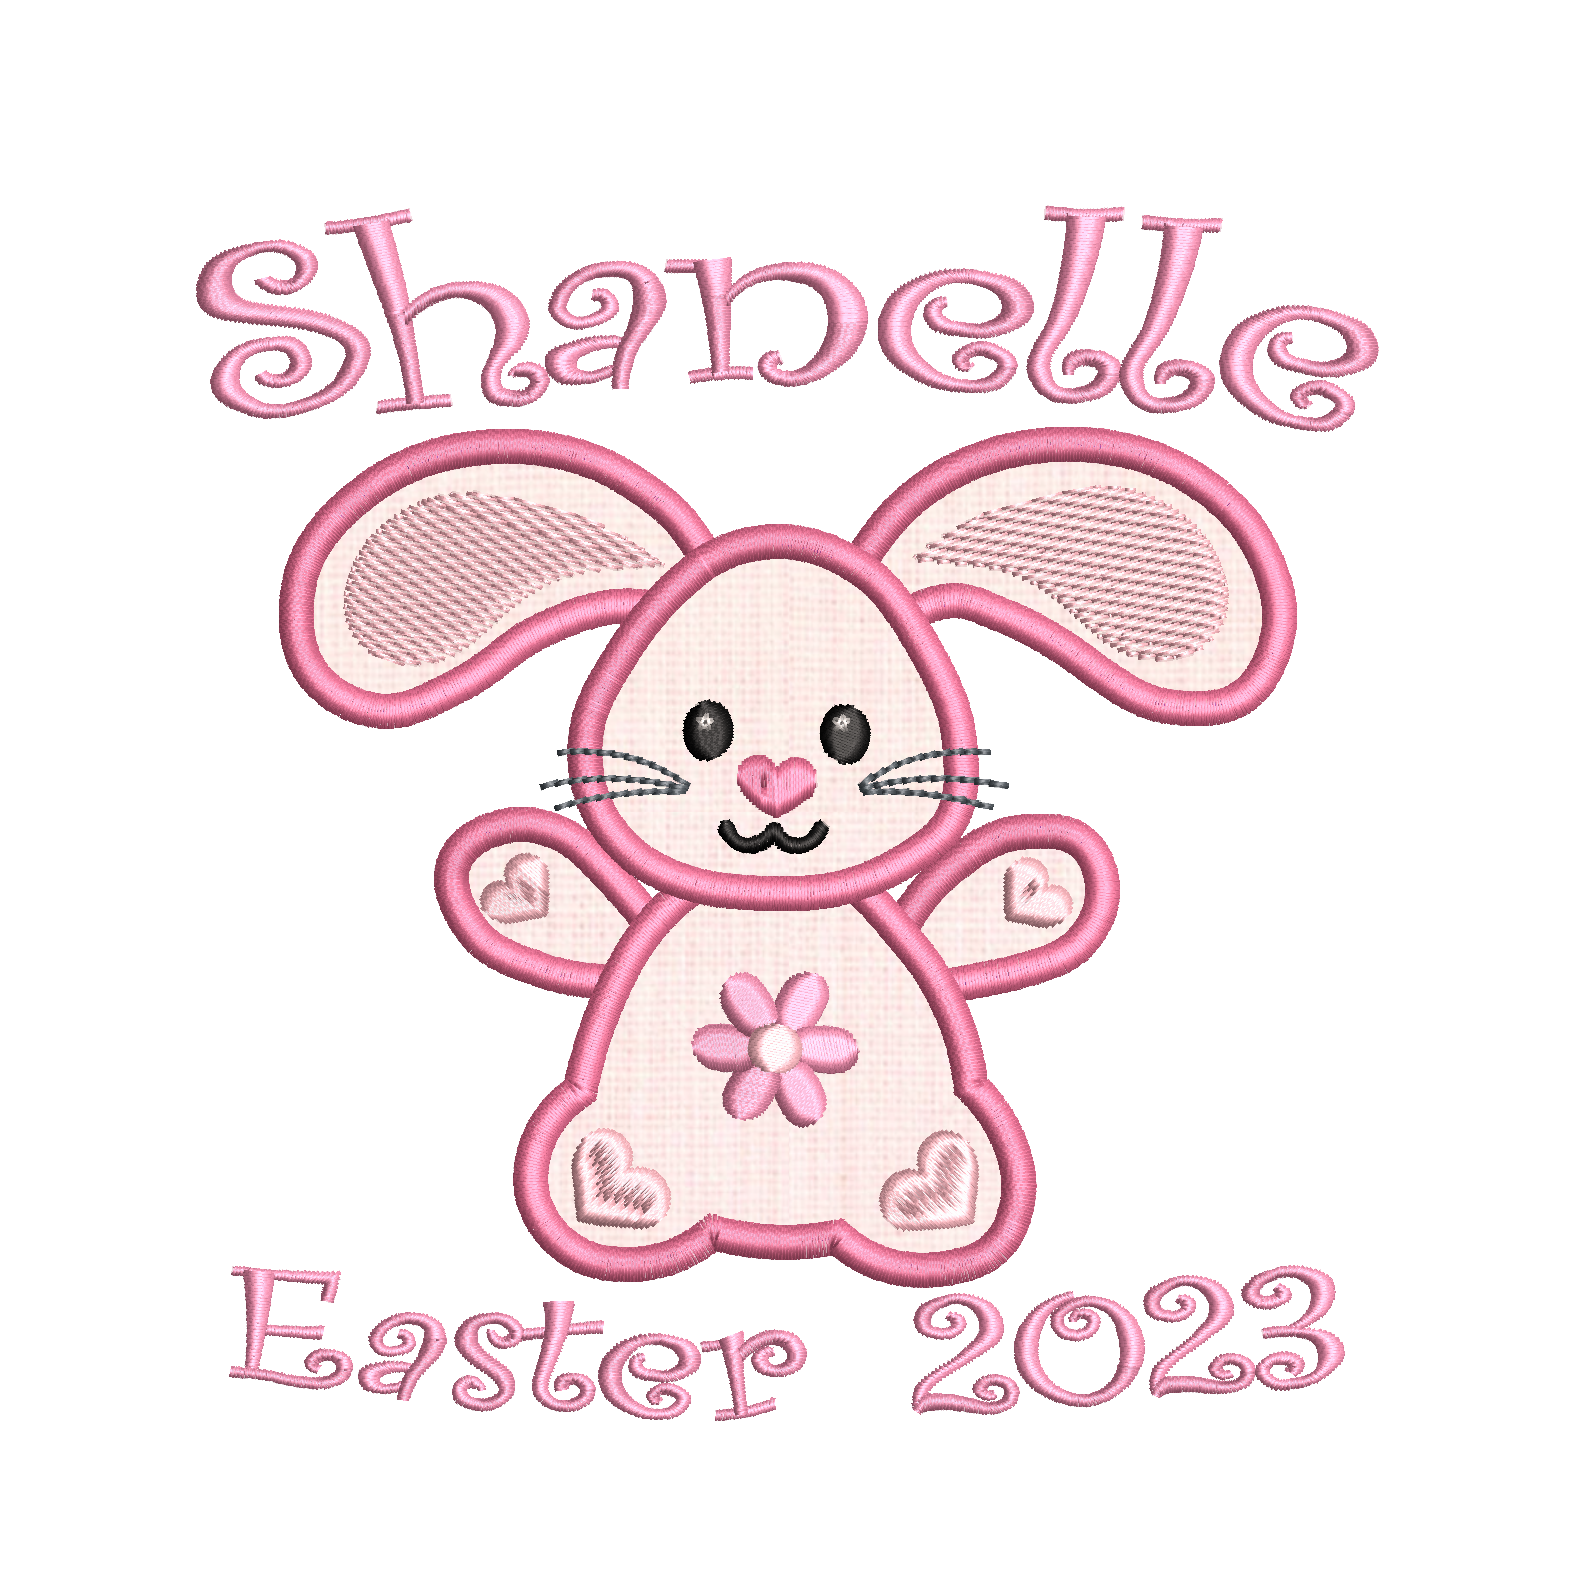 Customised Easter bunny applique machine embroidery design by rosiedayembroidery.com